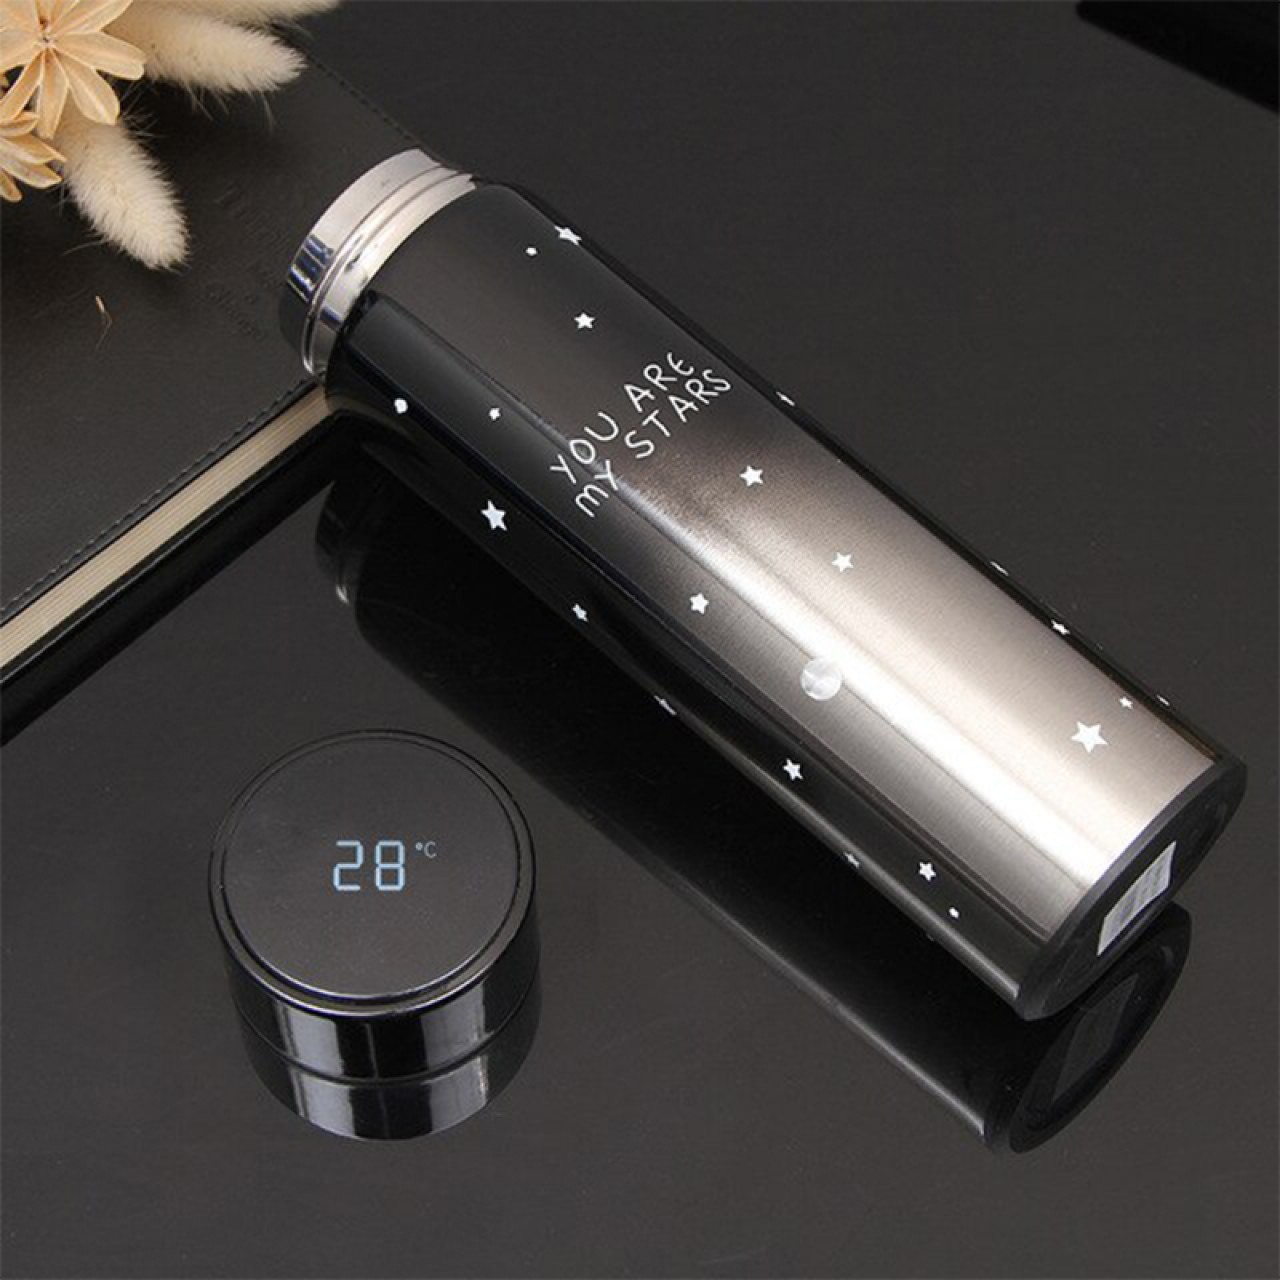 Your Are My Star Temperature Bottle With Smart Display